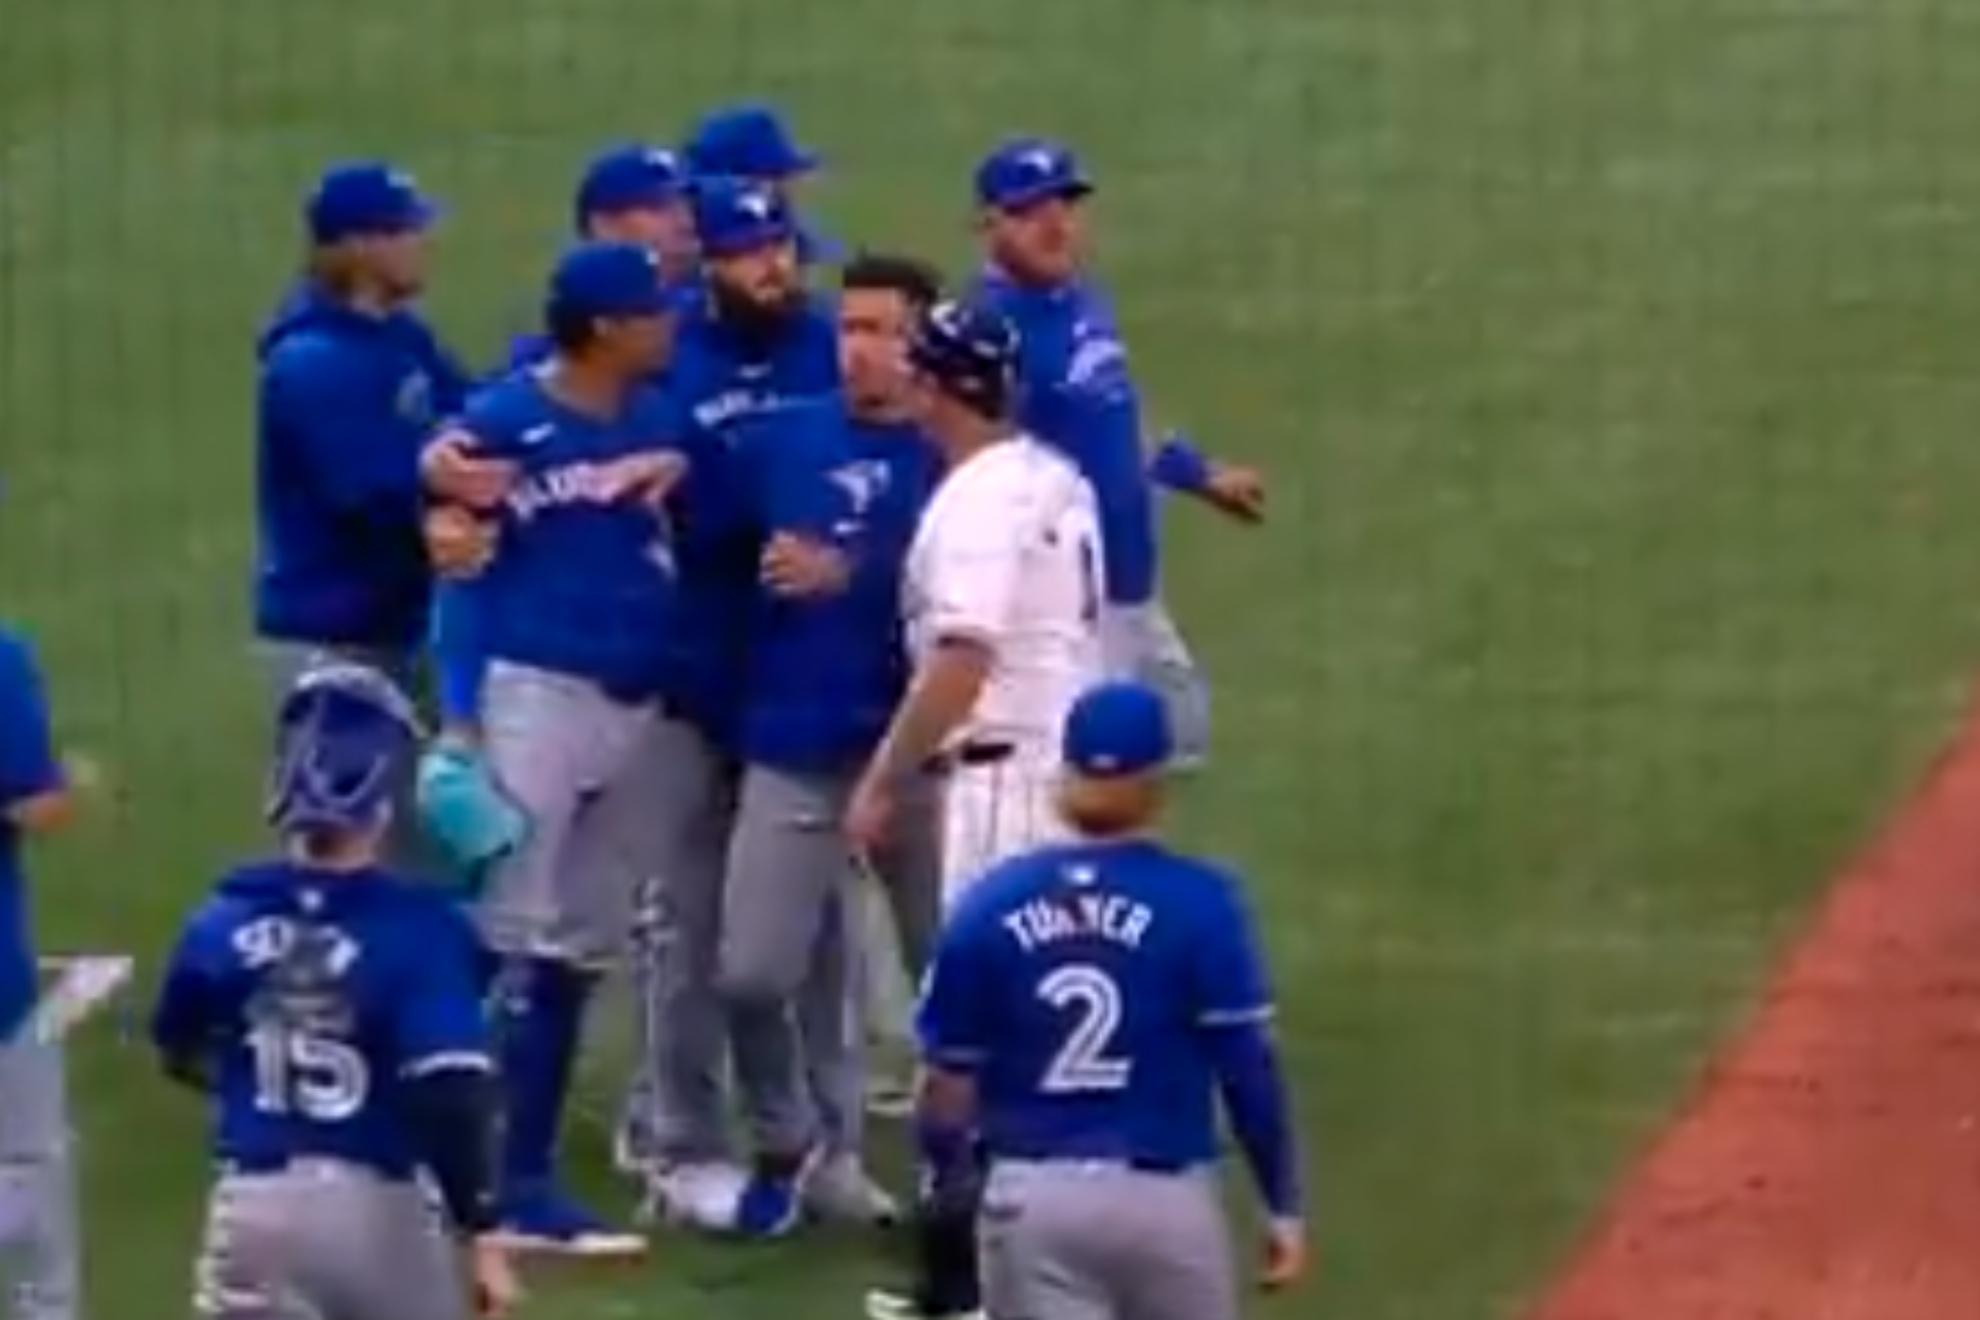 Rays, Blue Jays showcase the first bench-clearing game of the season to finish game 5-1